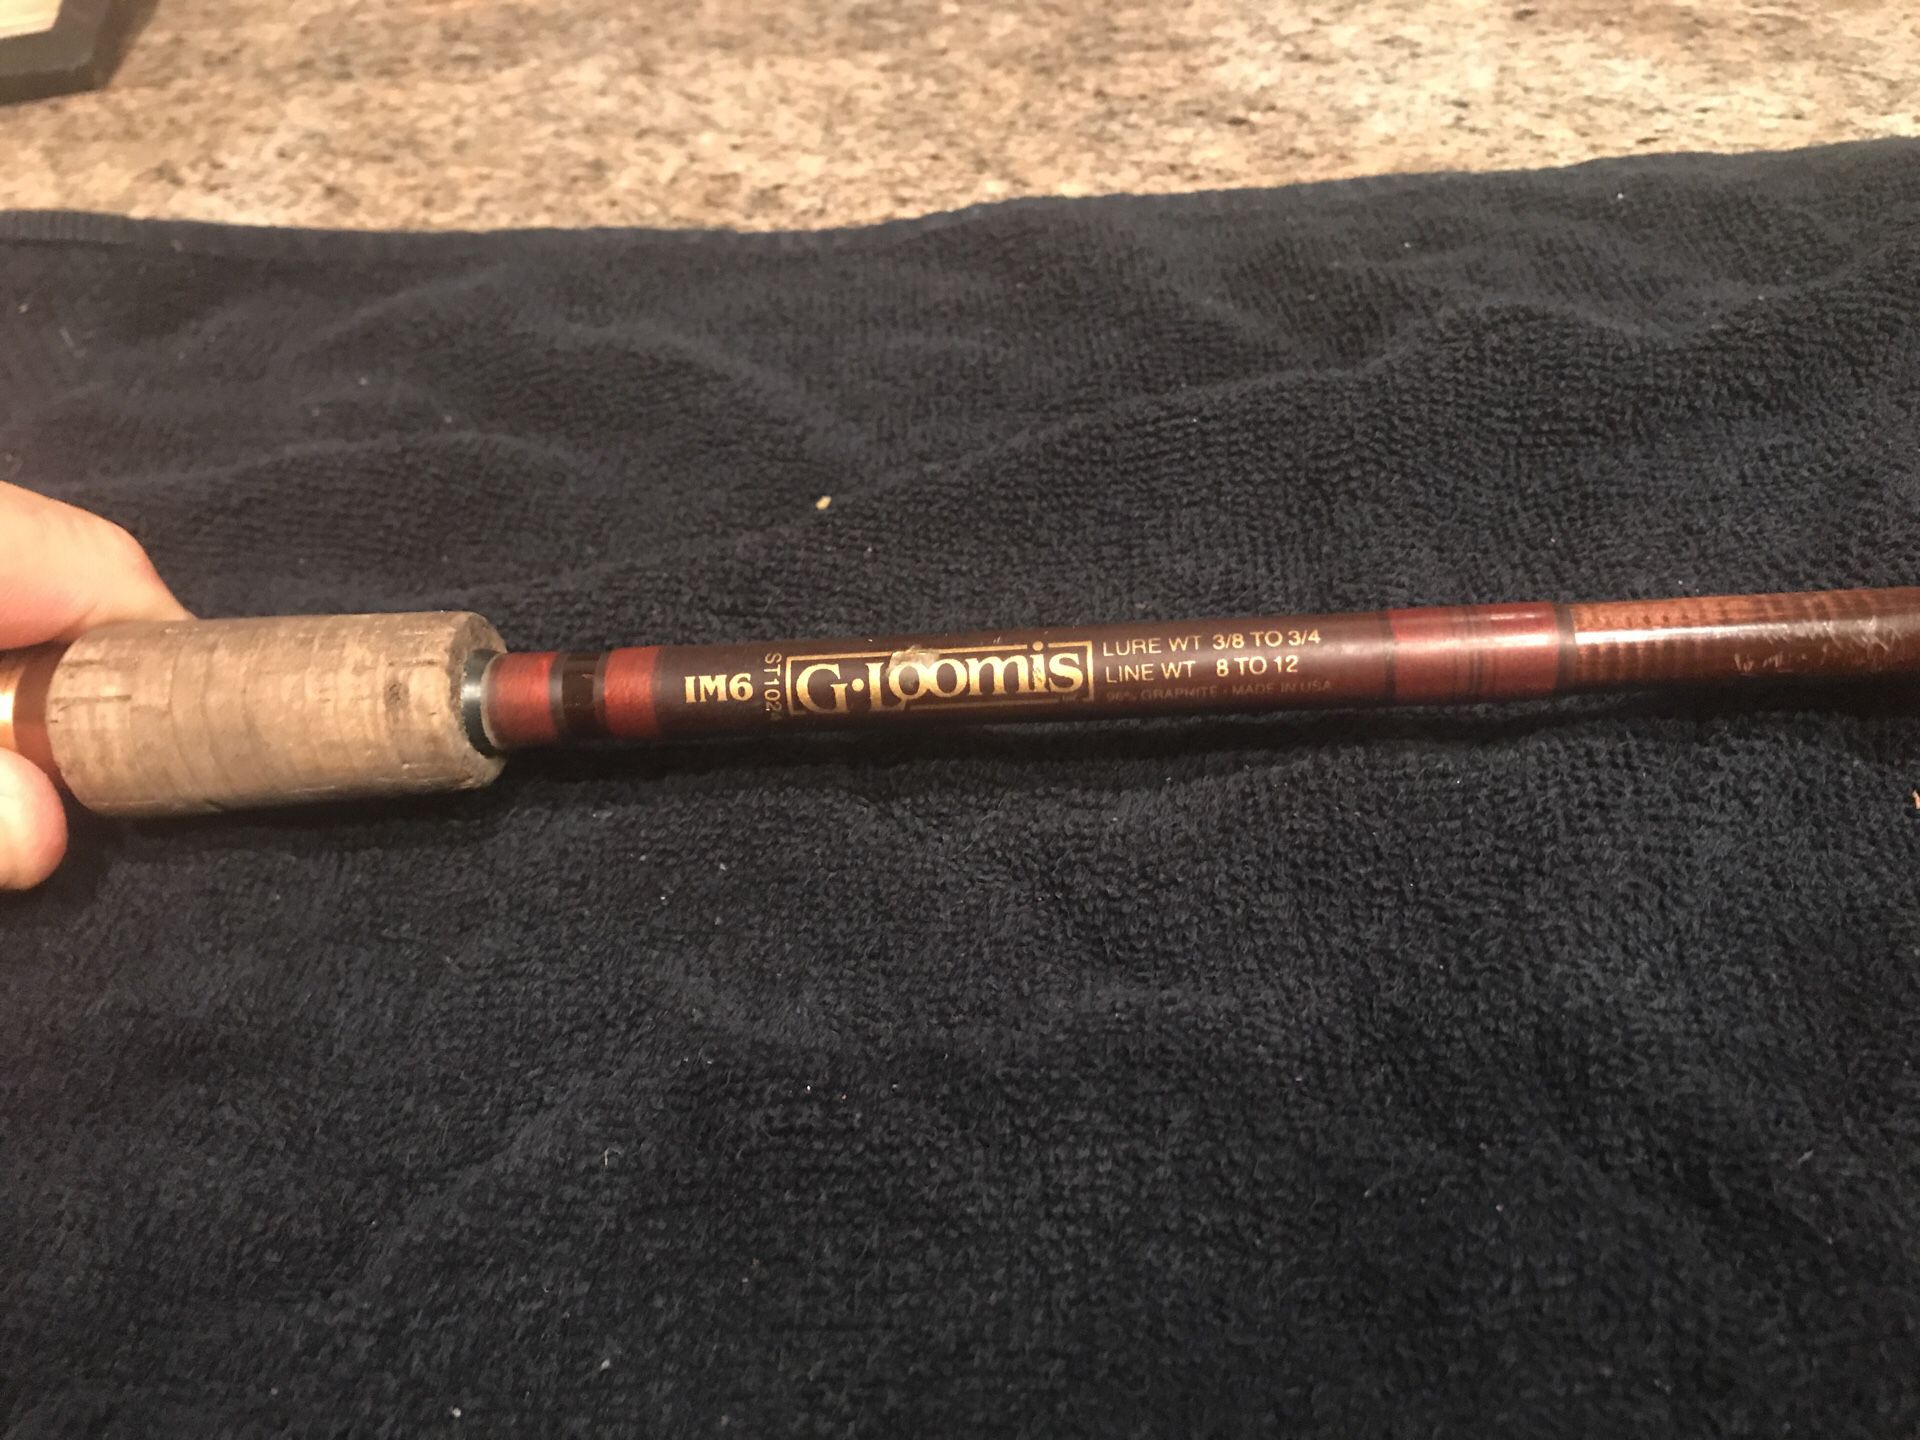 G-loomis im6 Fishing rod USA ST1024 for Sale in San Leandro, CA - OfferUp